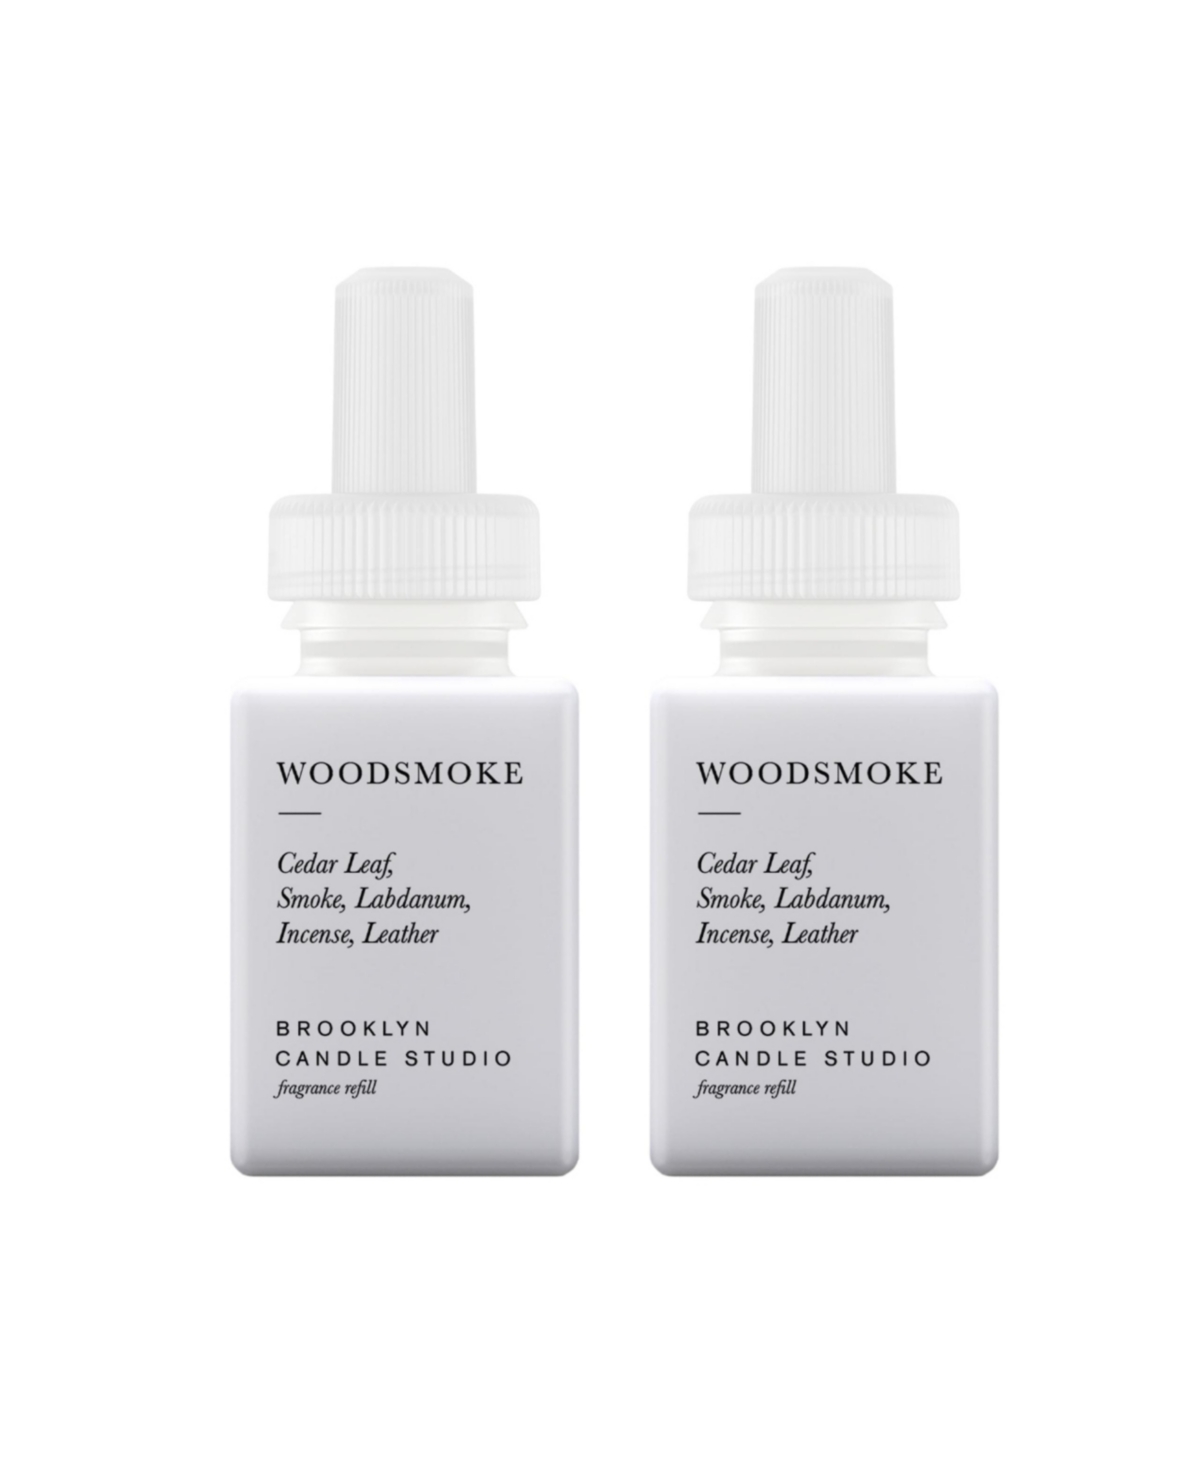 Brooklyn Candle Studio - Woodsmoke - Home Scent Refill - Smart Home Air Diffuser Fragrance - Up to 120-Hours of Luxury Fragrance per Vial - Clean